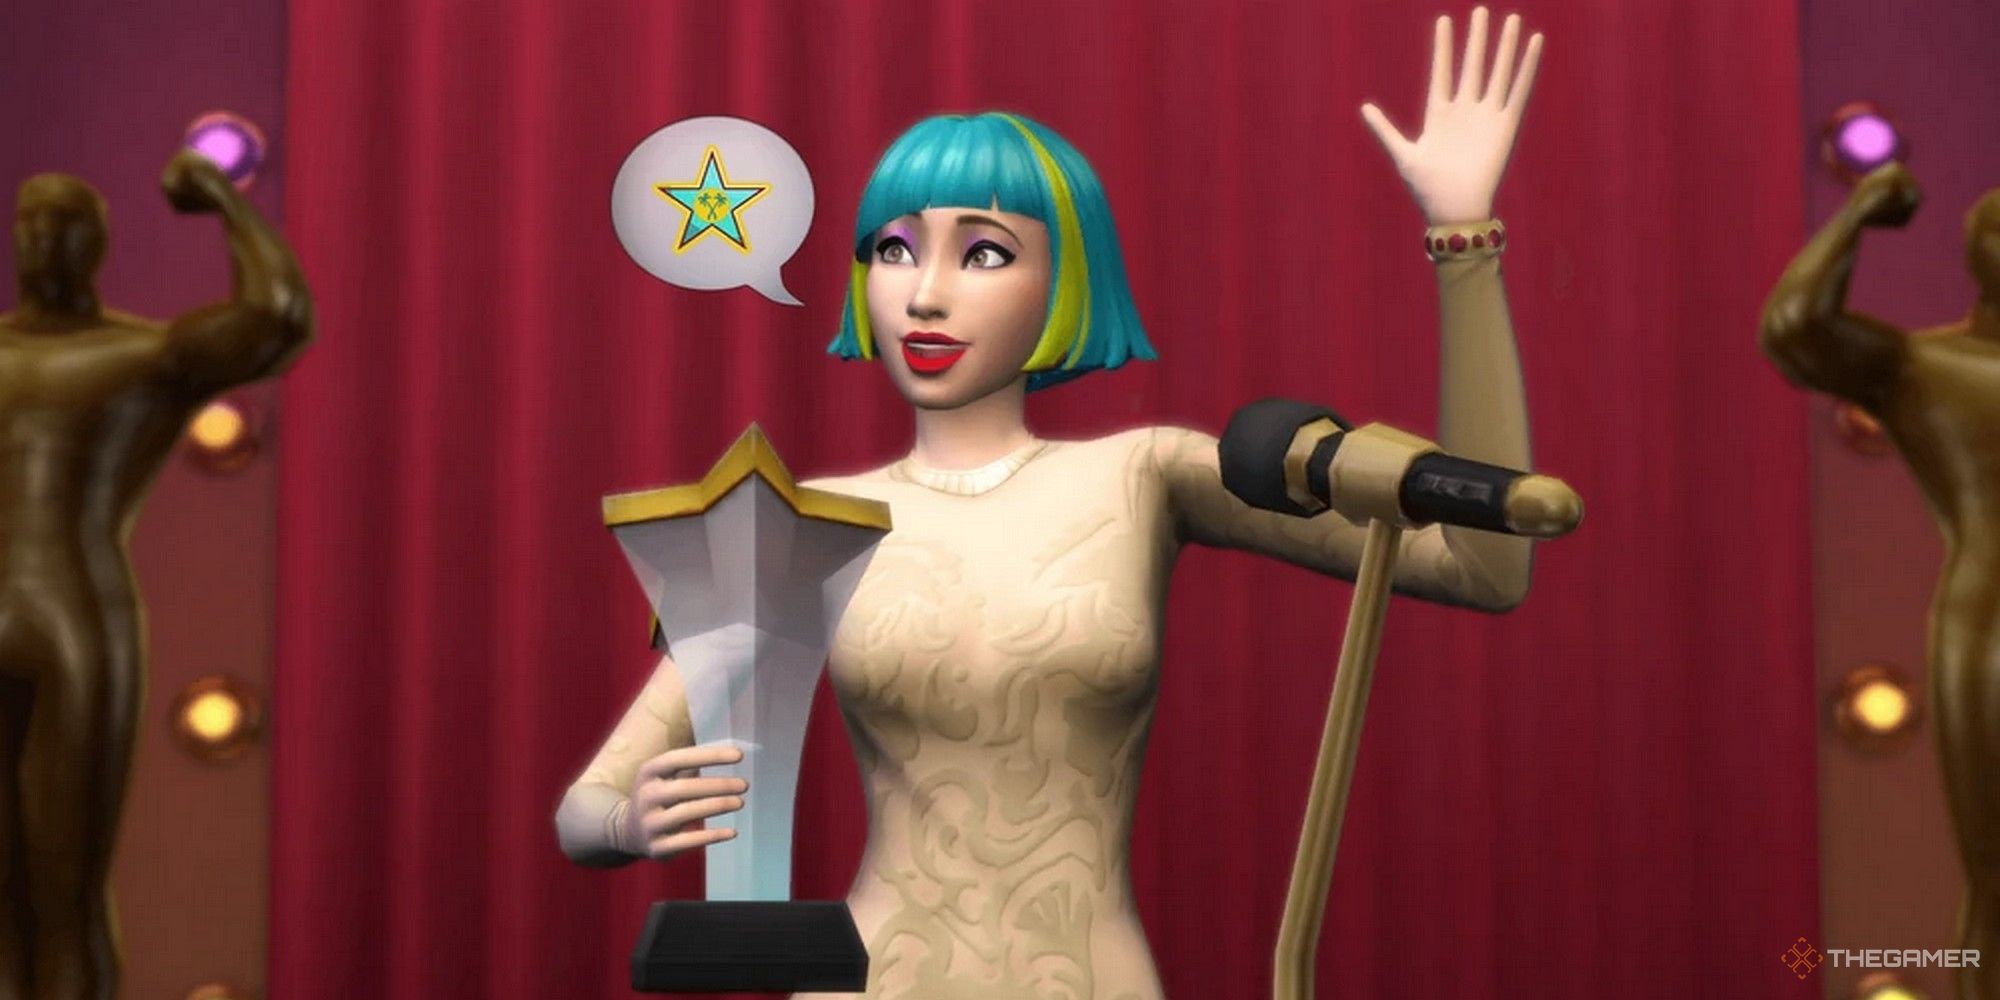 venessa jeong winning a starlight accolade award in the sims 4 get famous actor career